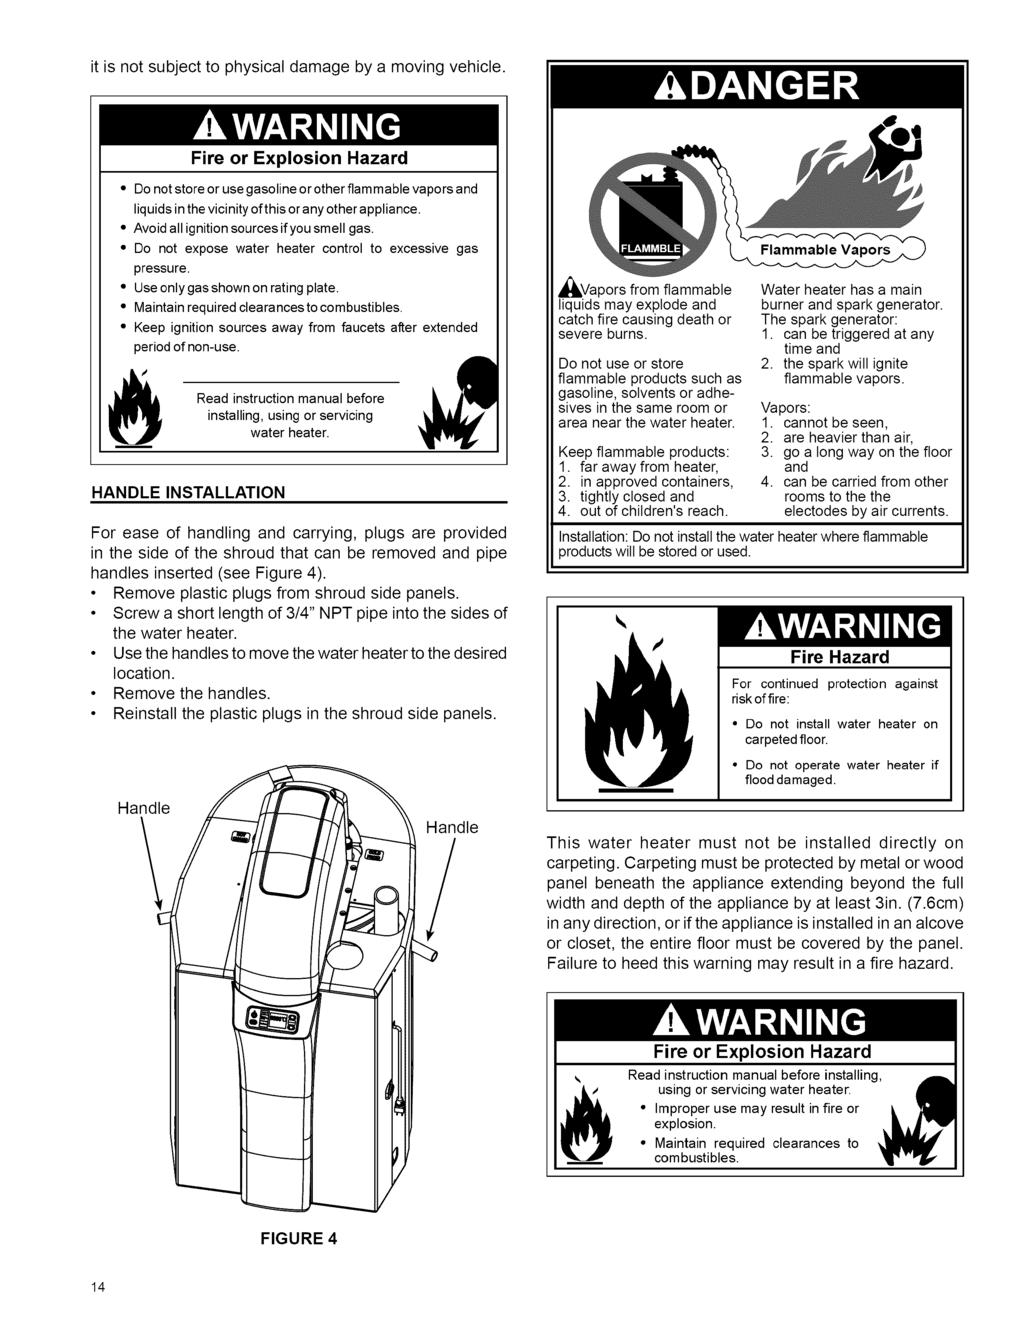 it is not subject to physical damage by a moving vehicle. Fire or Explosion Hazard Do not store or use gasoline or other flammable vapors and liquids in the vicinity of this or any other appliance.